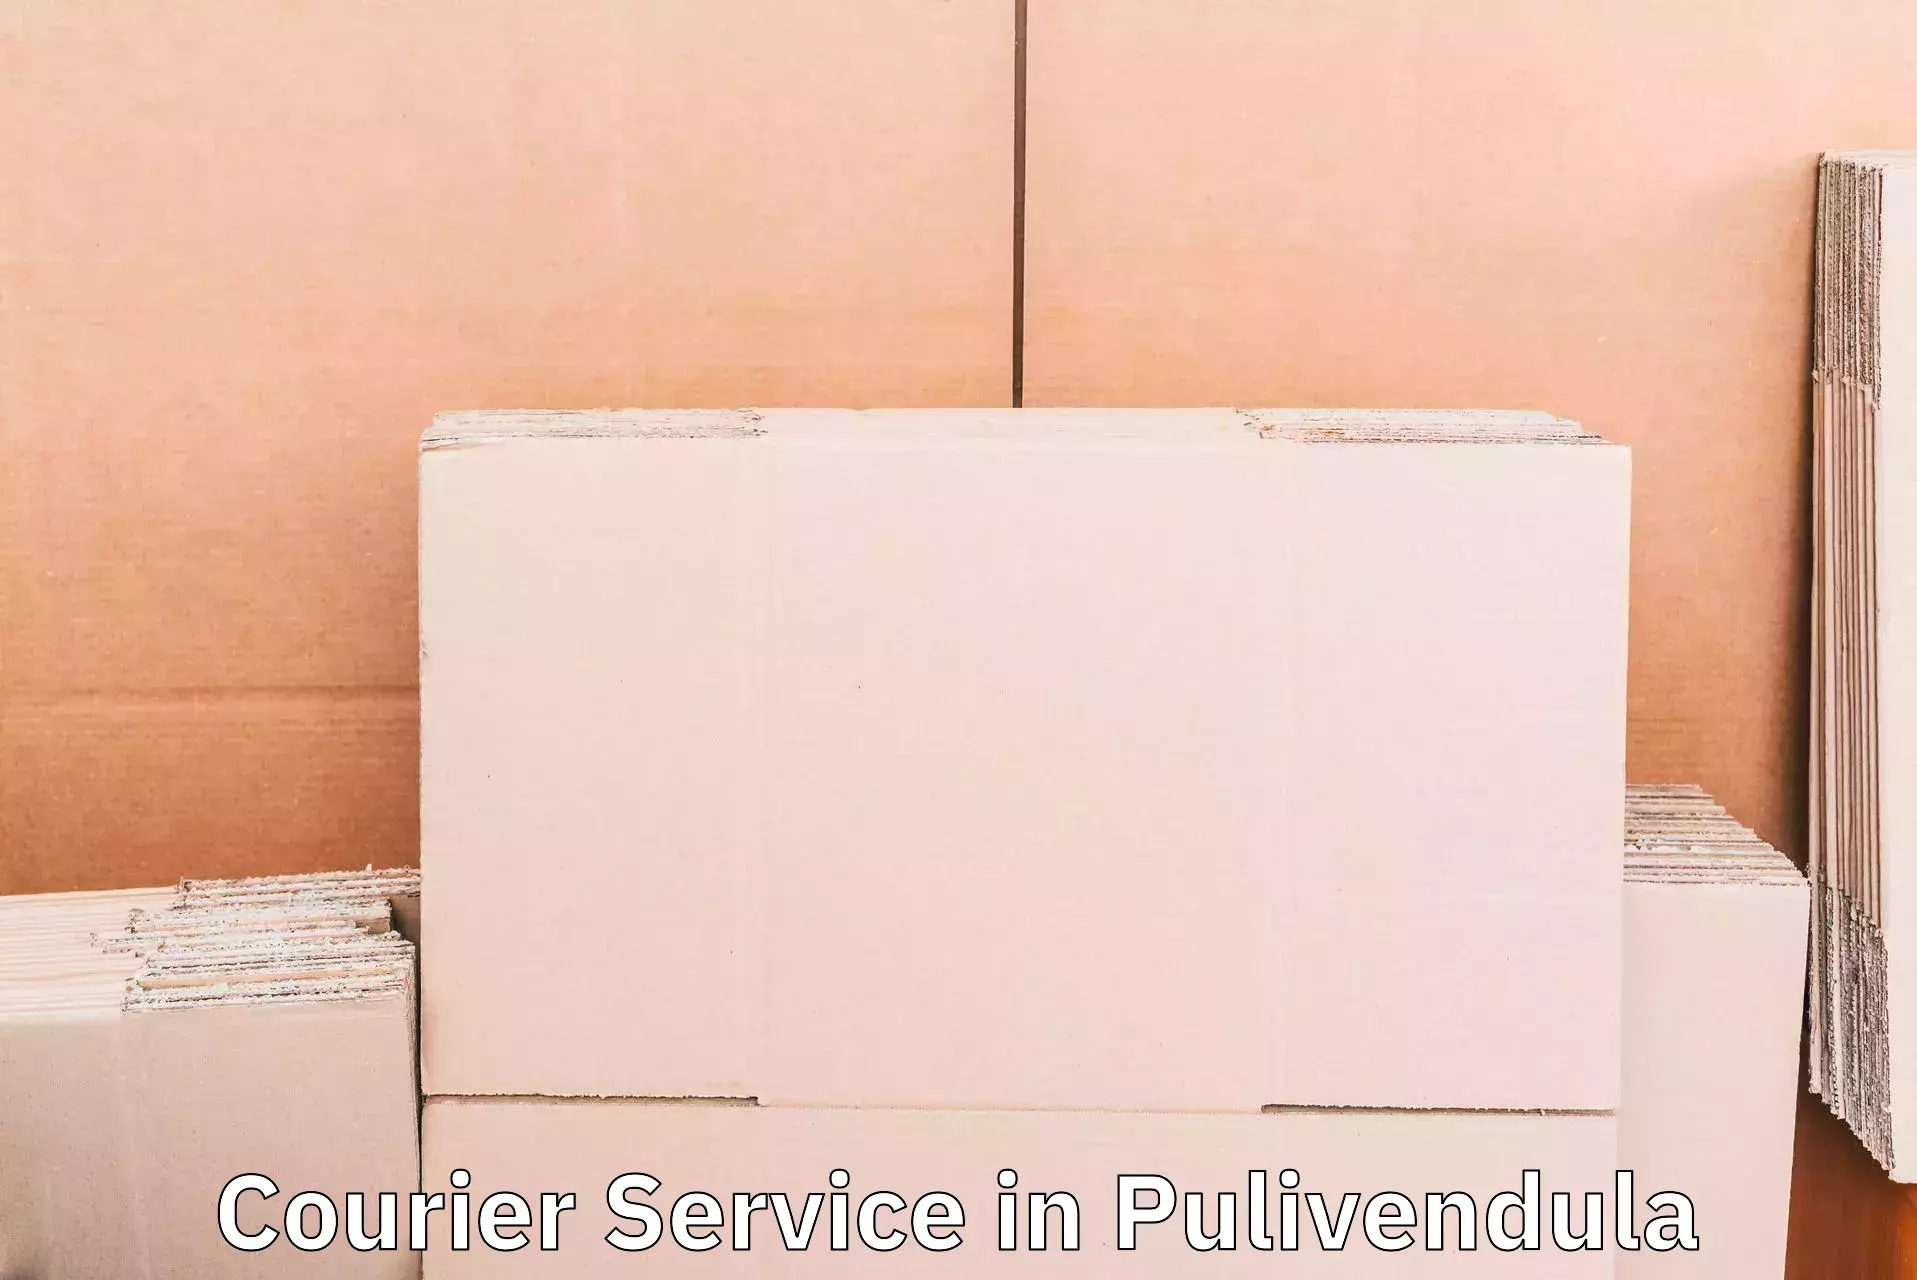 Advanced shipping technology in Pulivendula